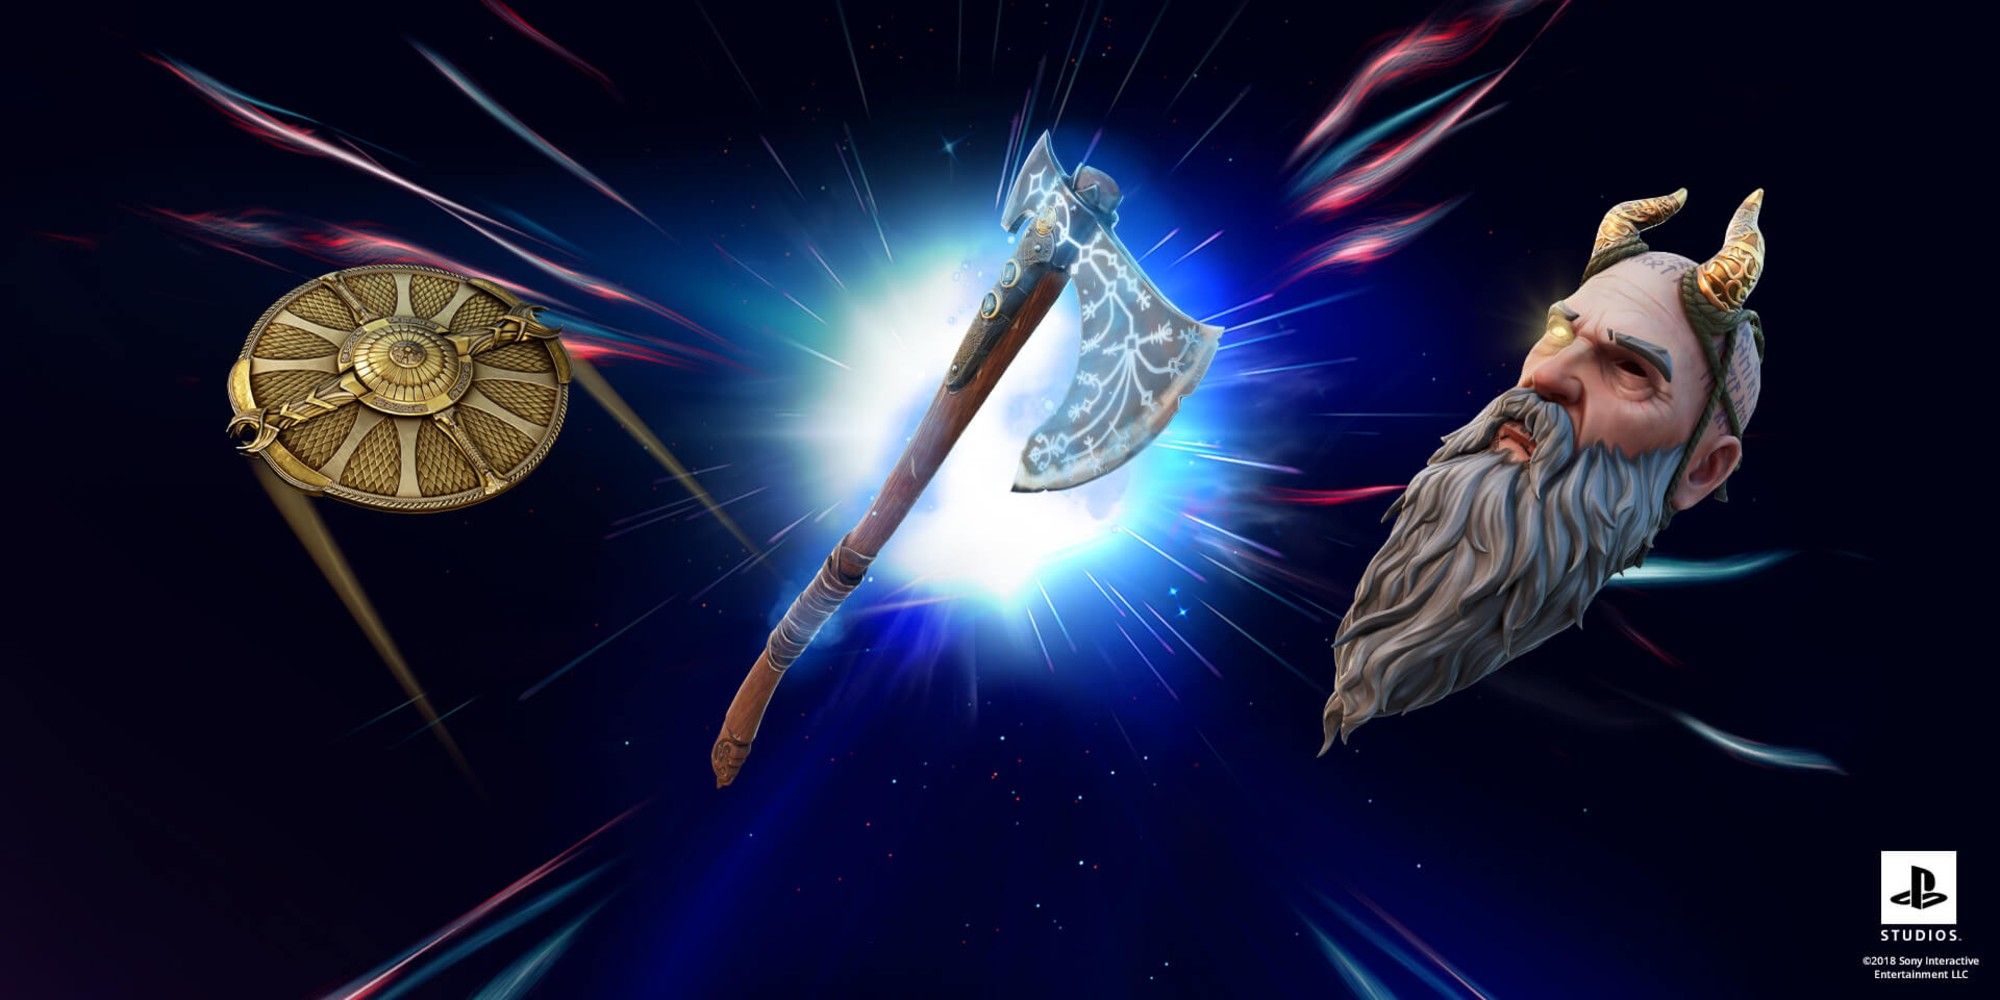 Fortnite Season 5 Kratos skin cosmetic accessories include a Shield Glider, Mimir Back Bling, and Leviathan Axe harvesting tool